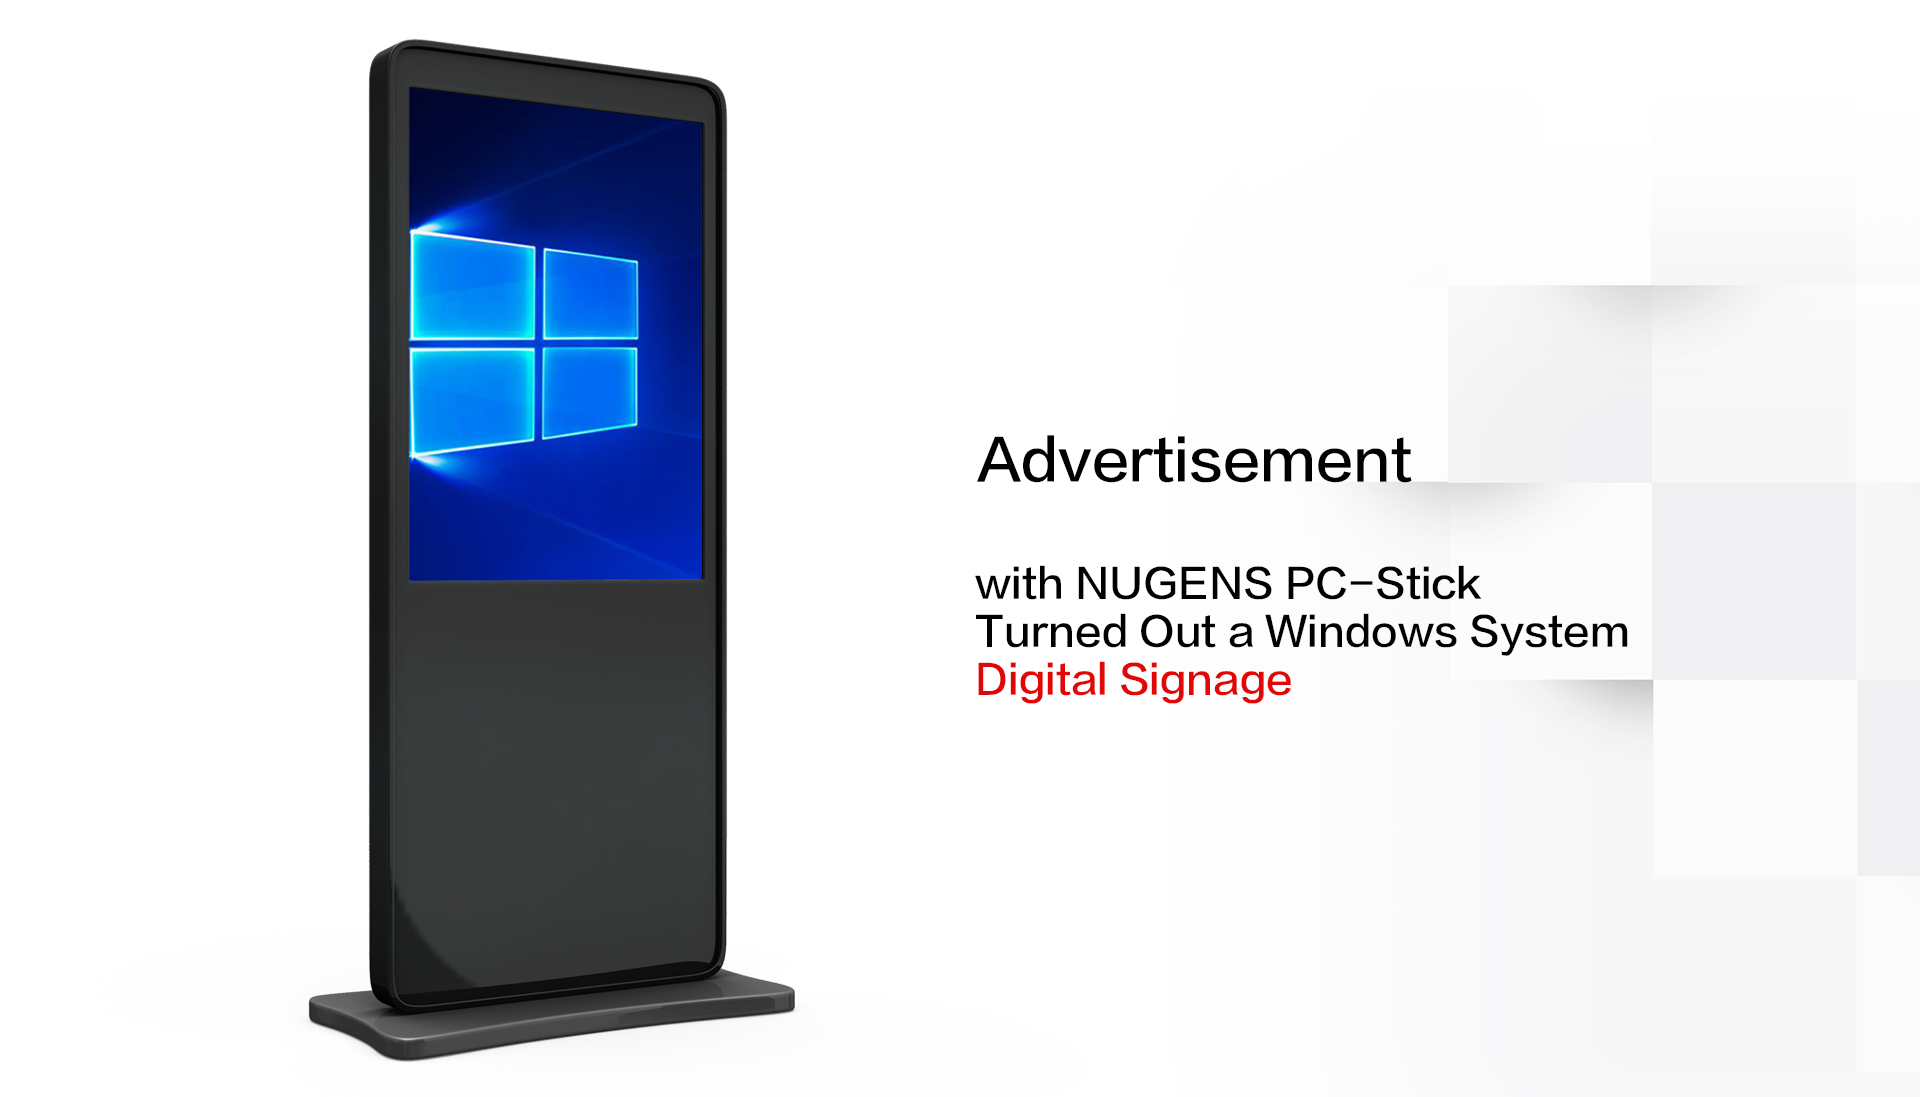  with NUGENS PC-Stick,Turned Out a Windows System Digital Signage